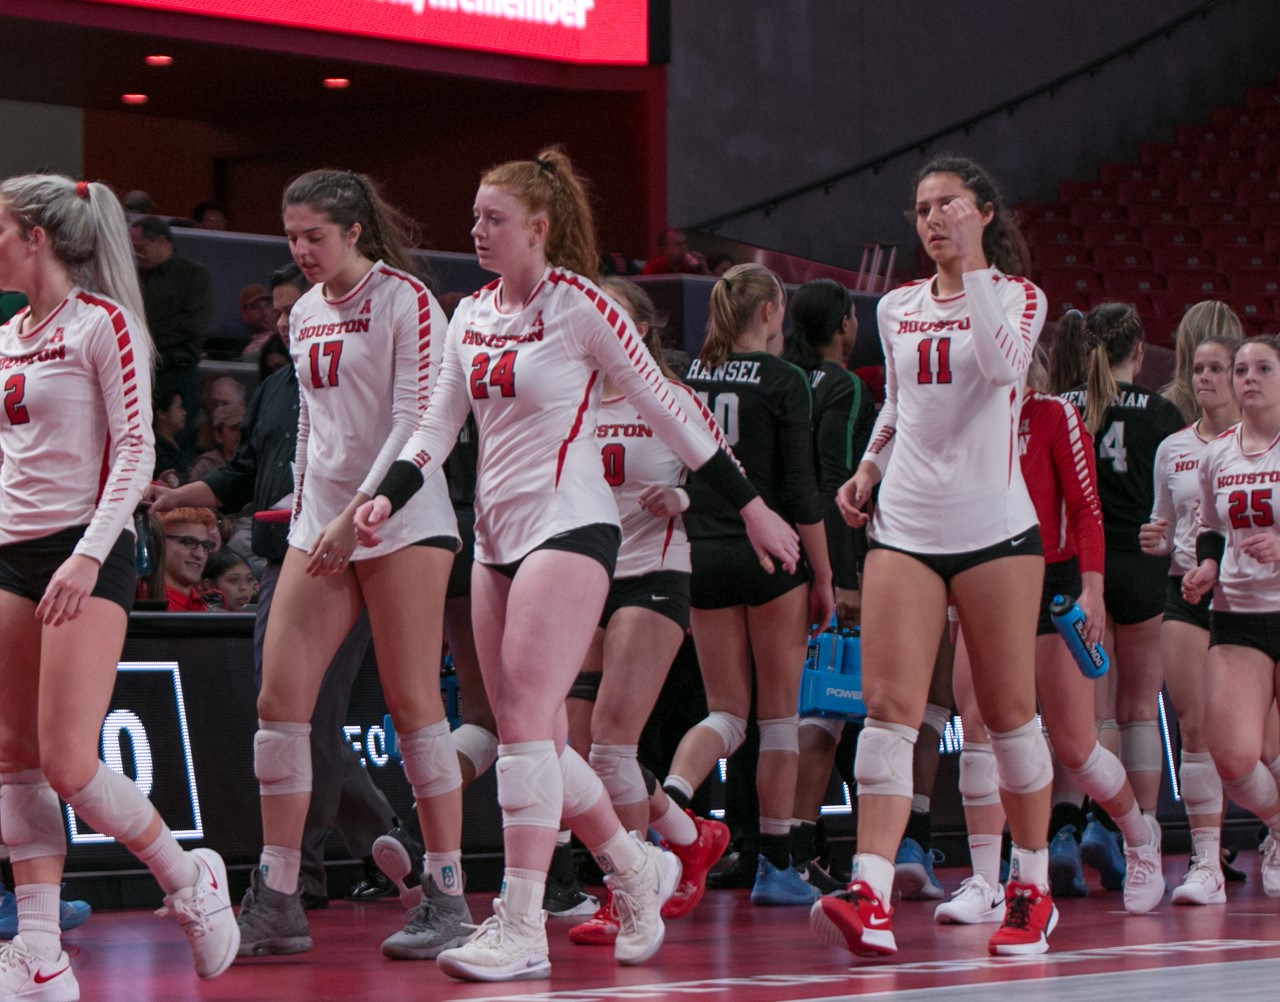 Houston outside hitter Abbie Jackson (24) walks with her teammates after a game in the 2019 season at Fertitta Center. Jackson led the UH volleyball team in kills in both games over the weekend against SMU. | Armando Yanez/The Cougar